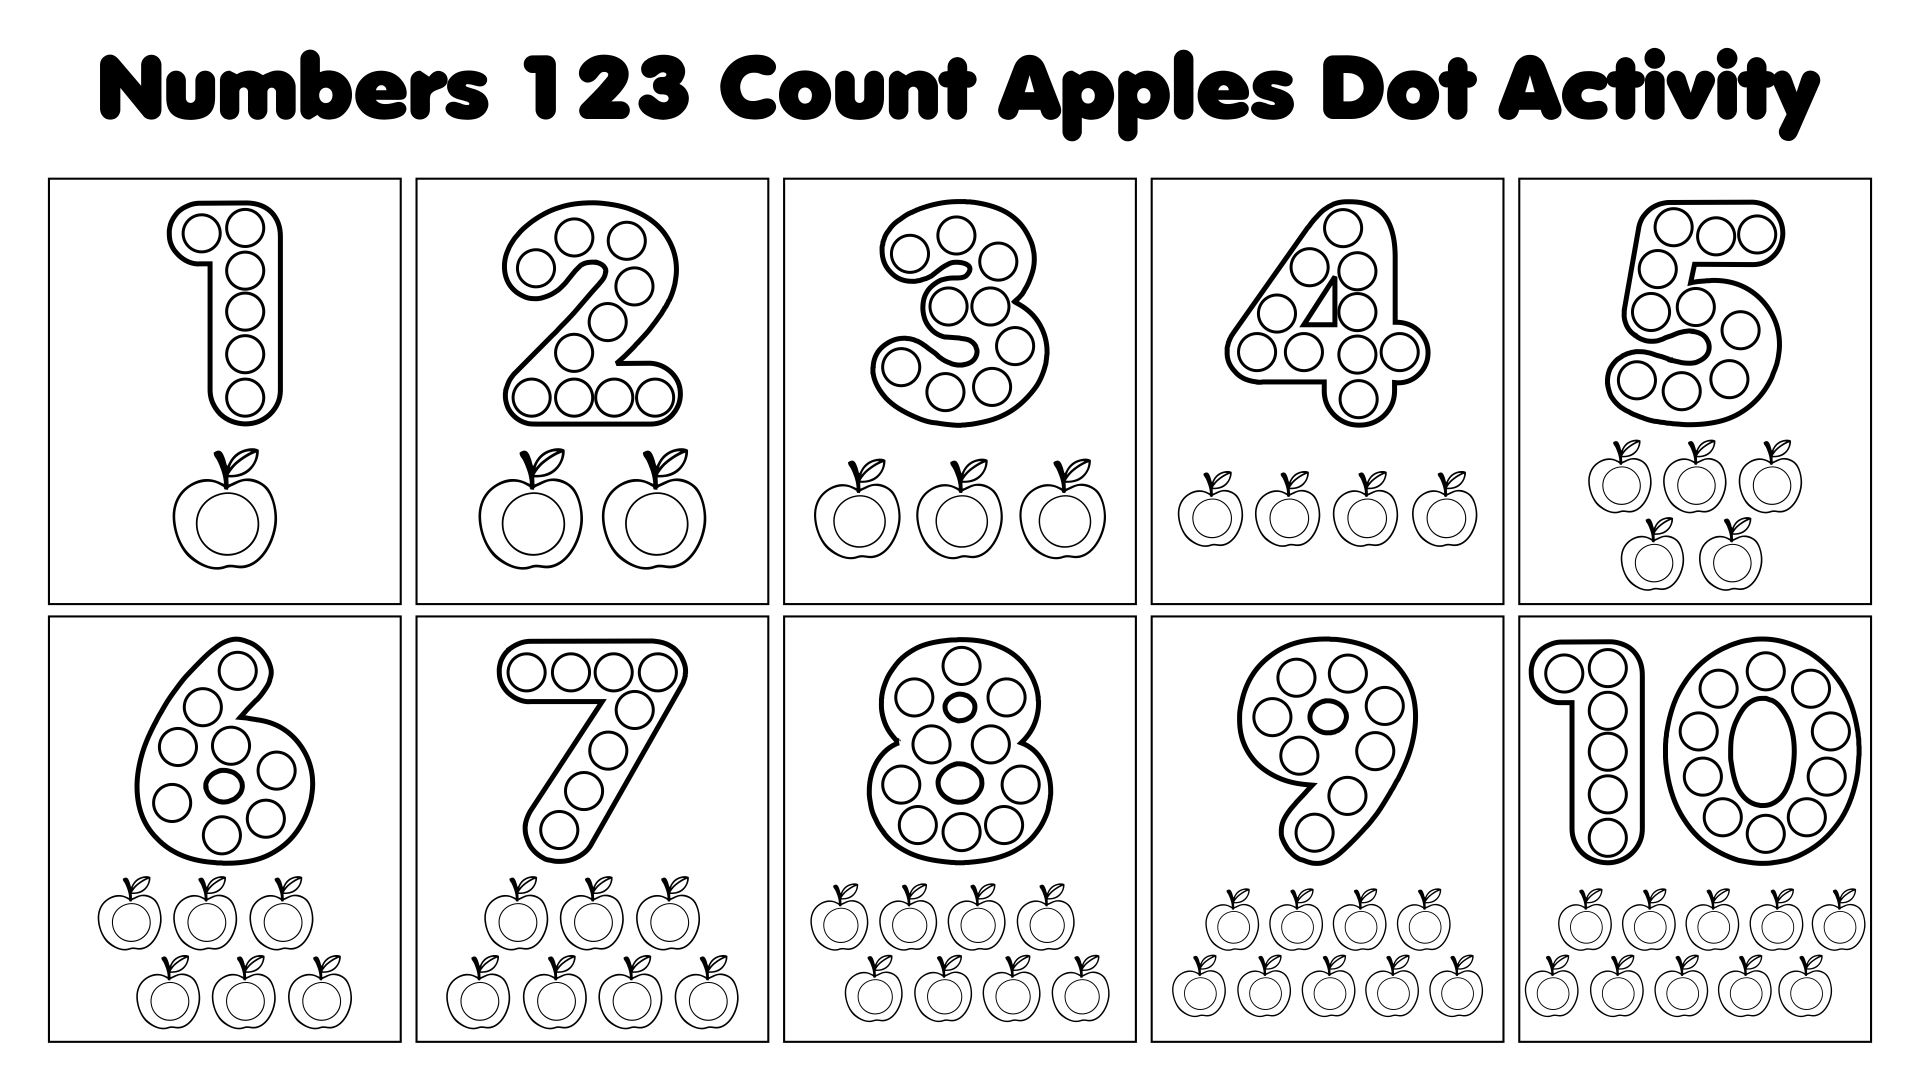 printable-flash-card-collection-for-numbers-with-the-corresponding-number-of-dots-arranged-in